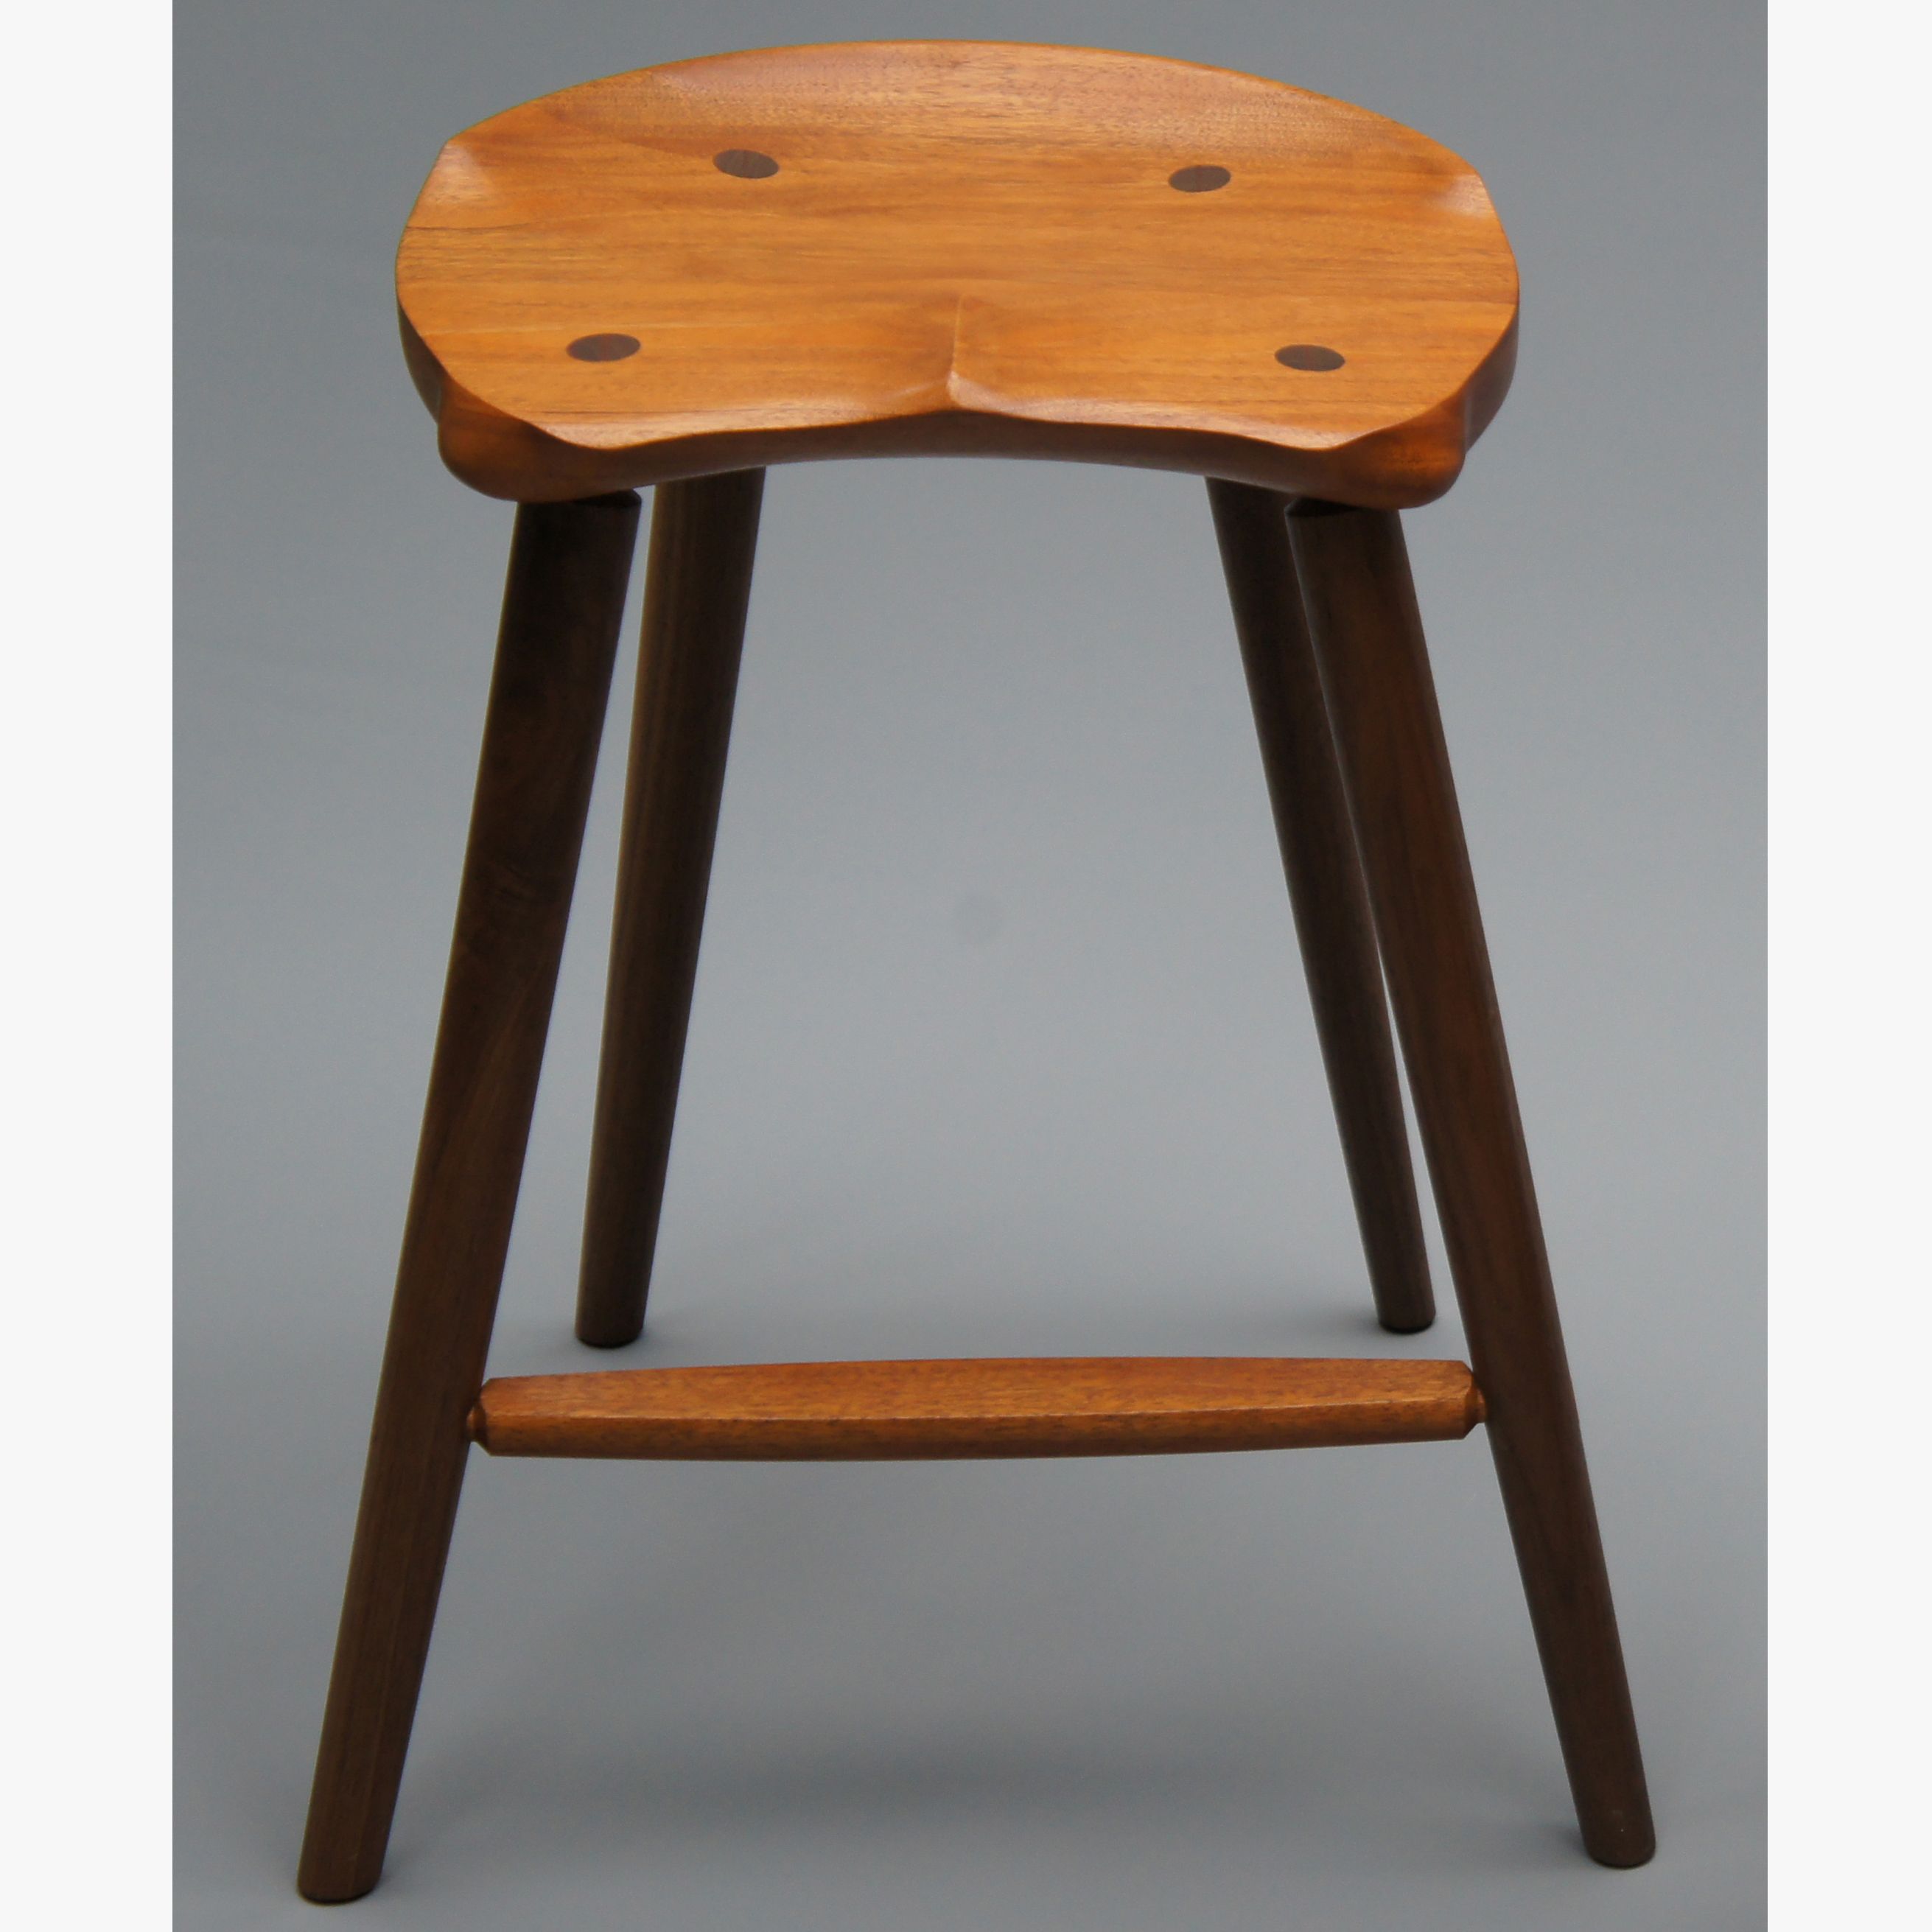 Saddle Seat Bar Stool Counter Height, Leather Saddle Seat Counter Stools